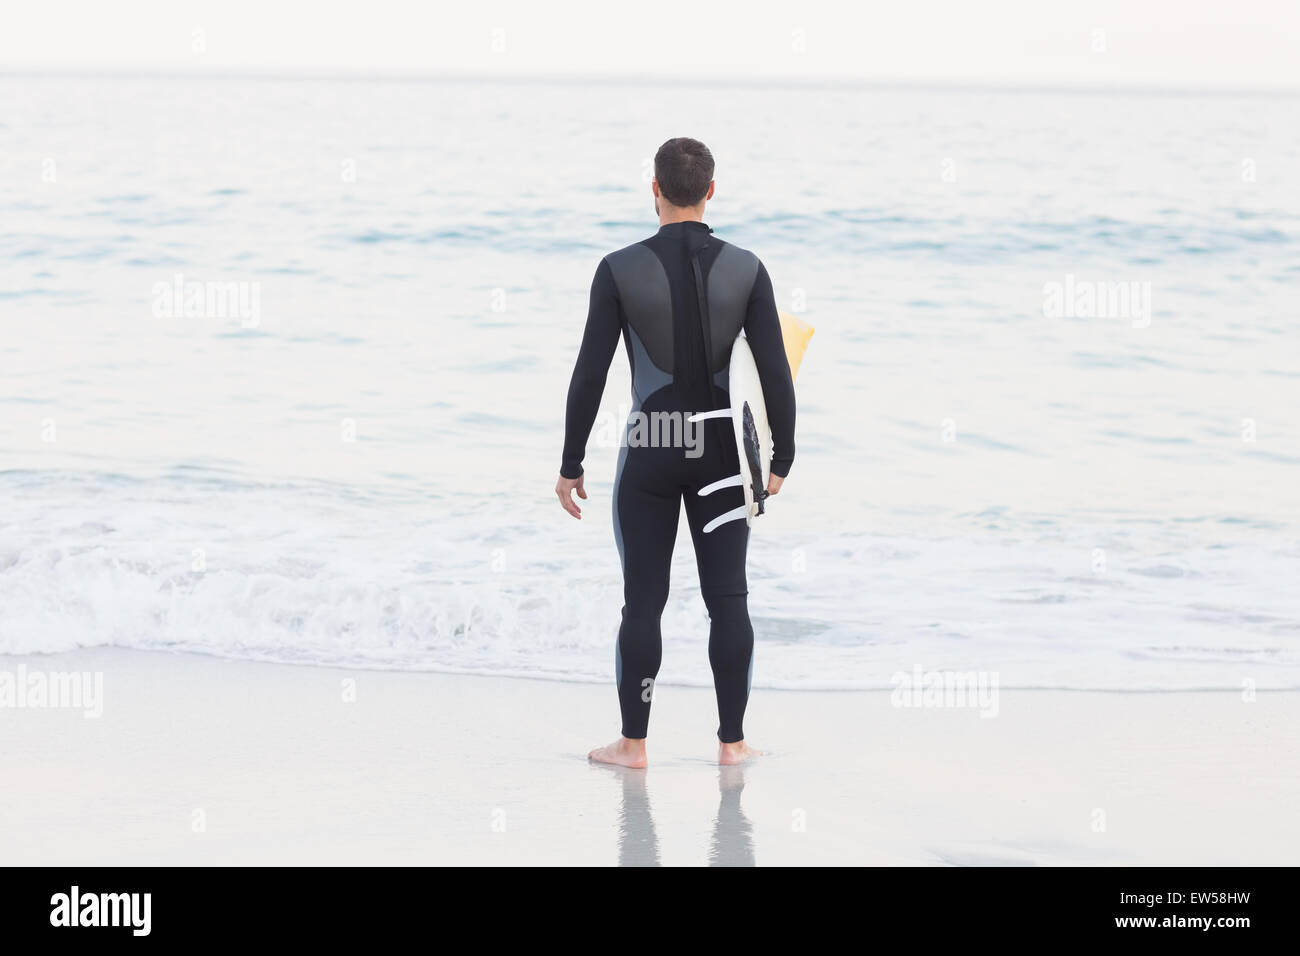 Man in wetsuit with a surfboard on a sunny day Stock Photo